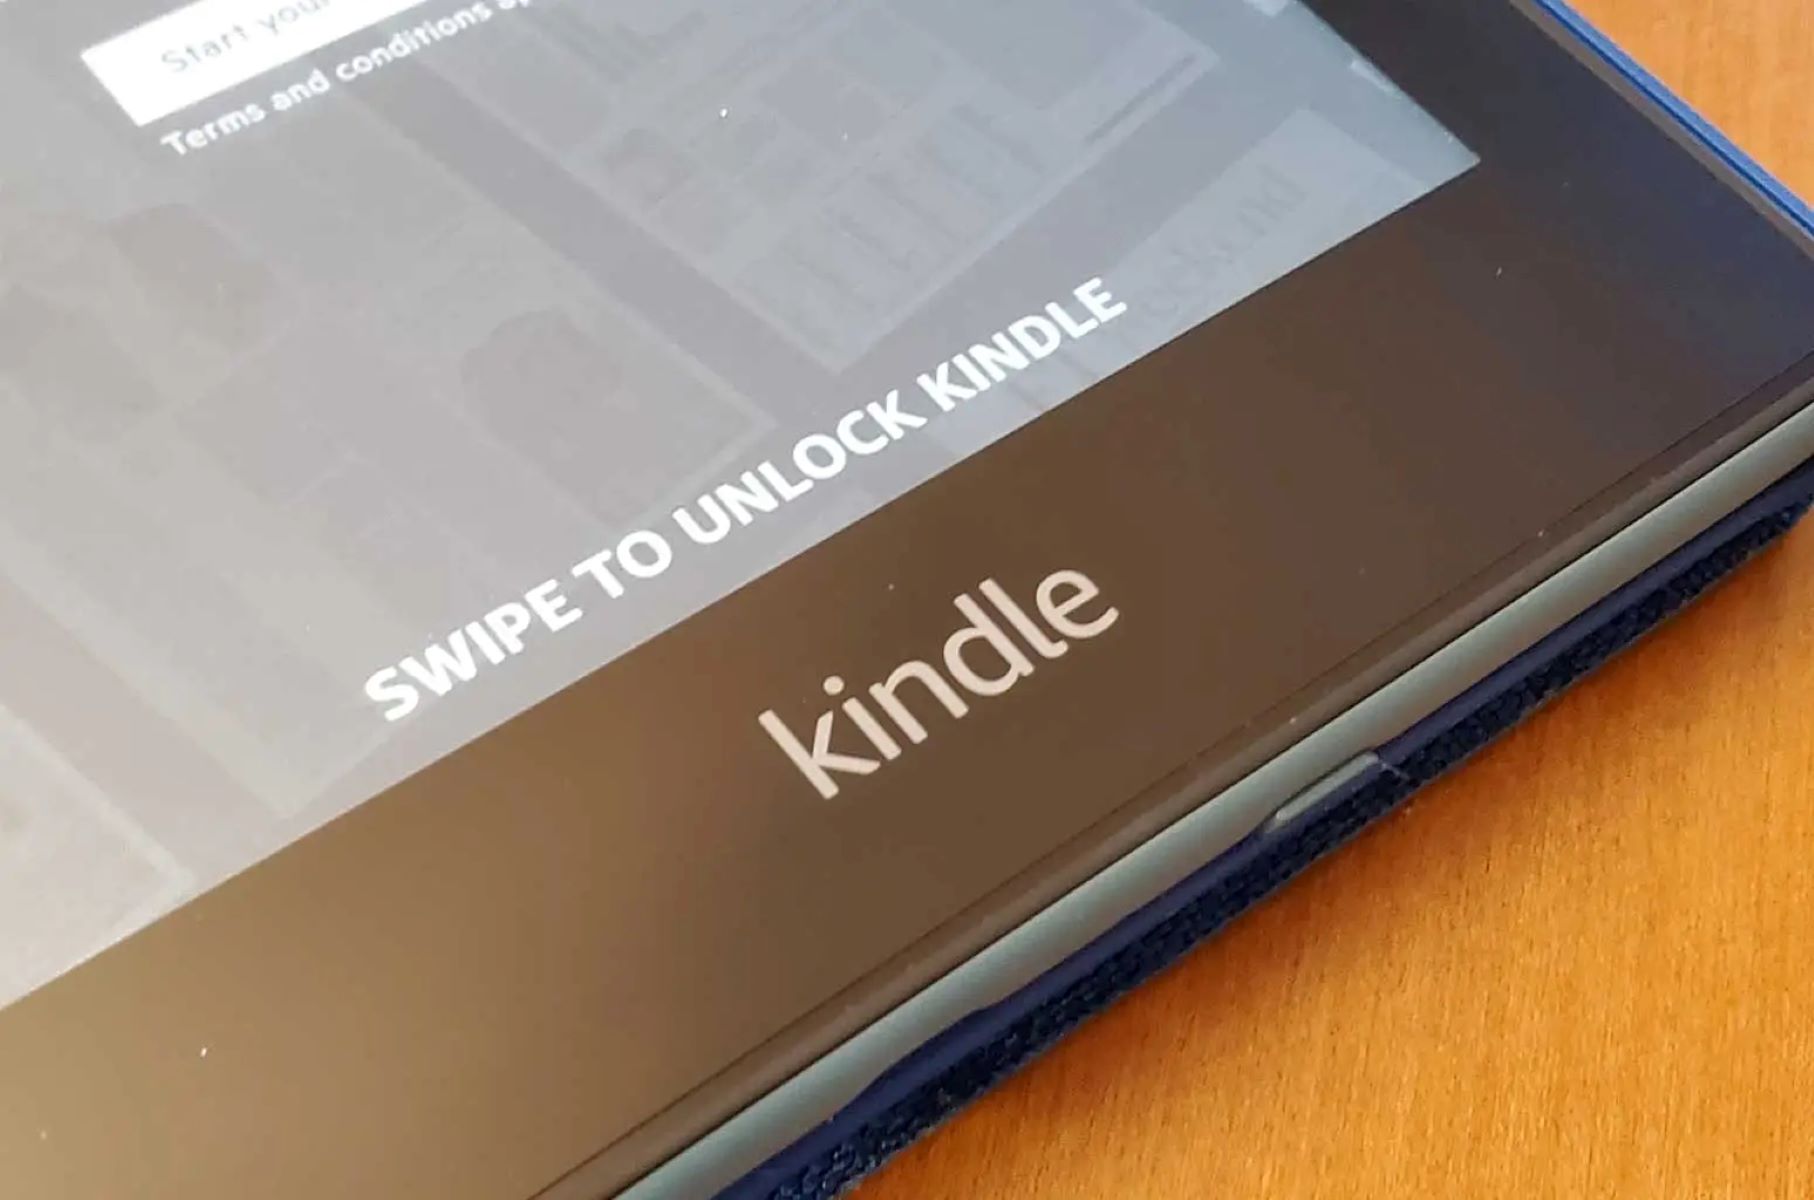 How To Unlock Kindle Fire